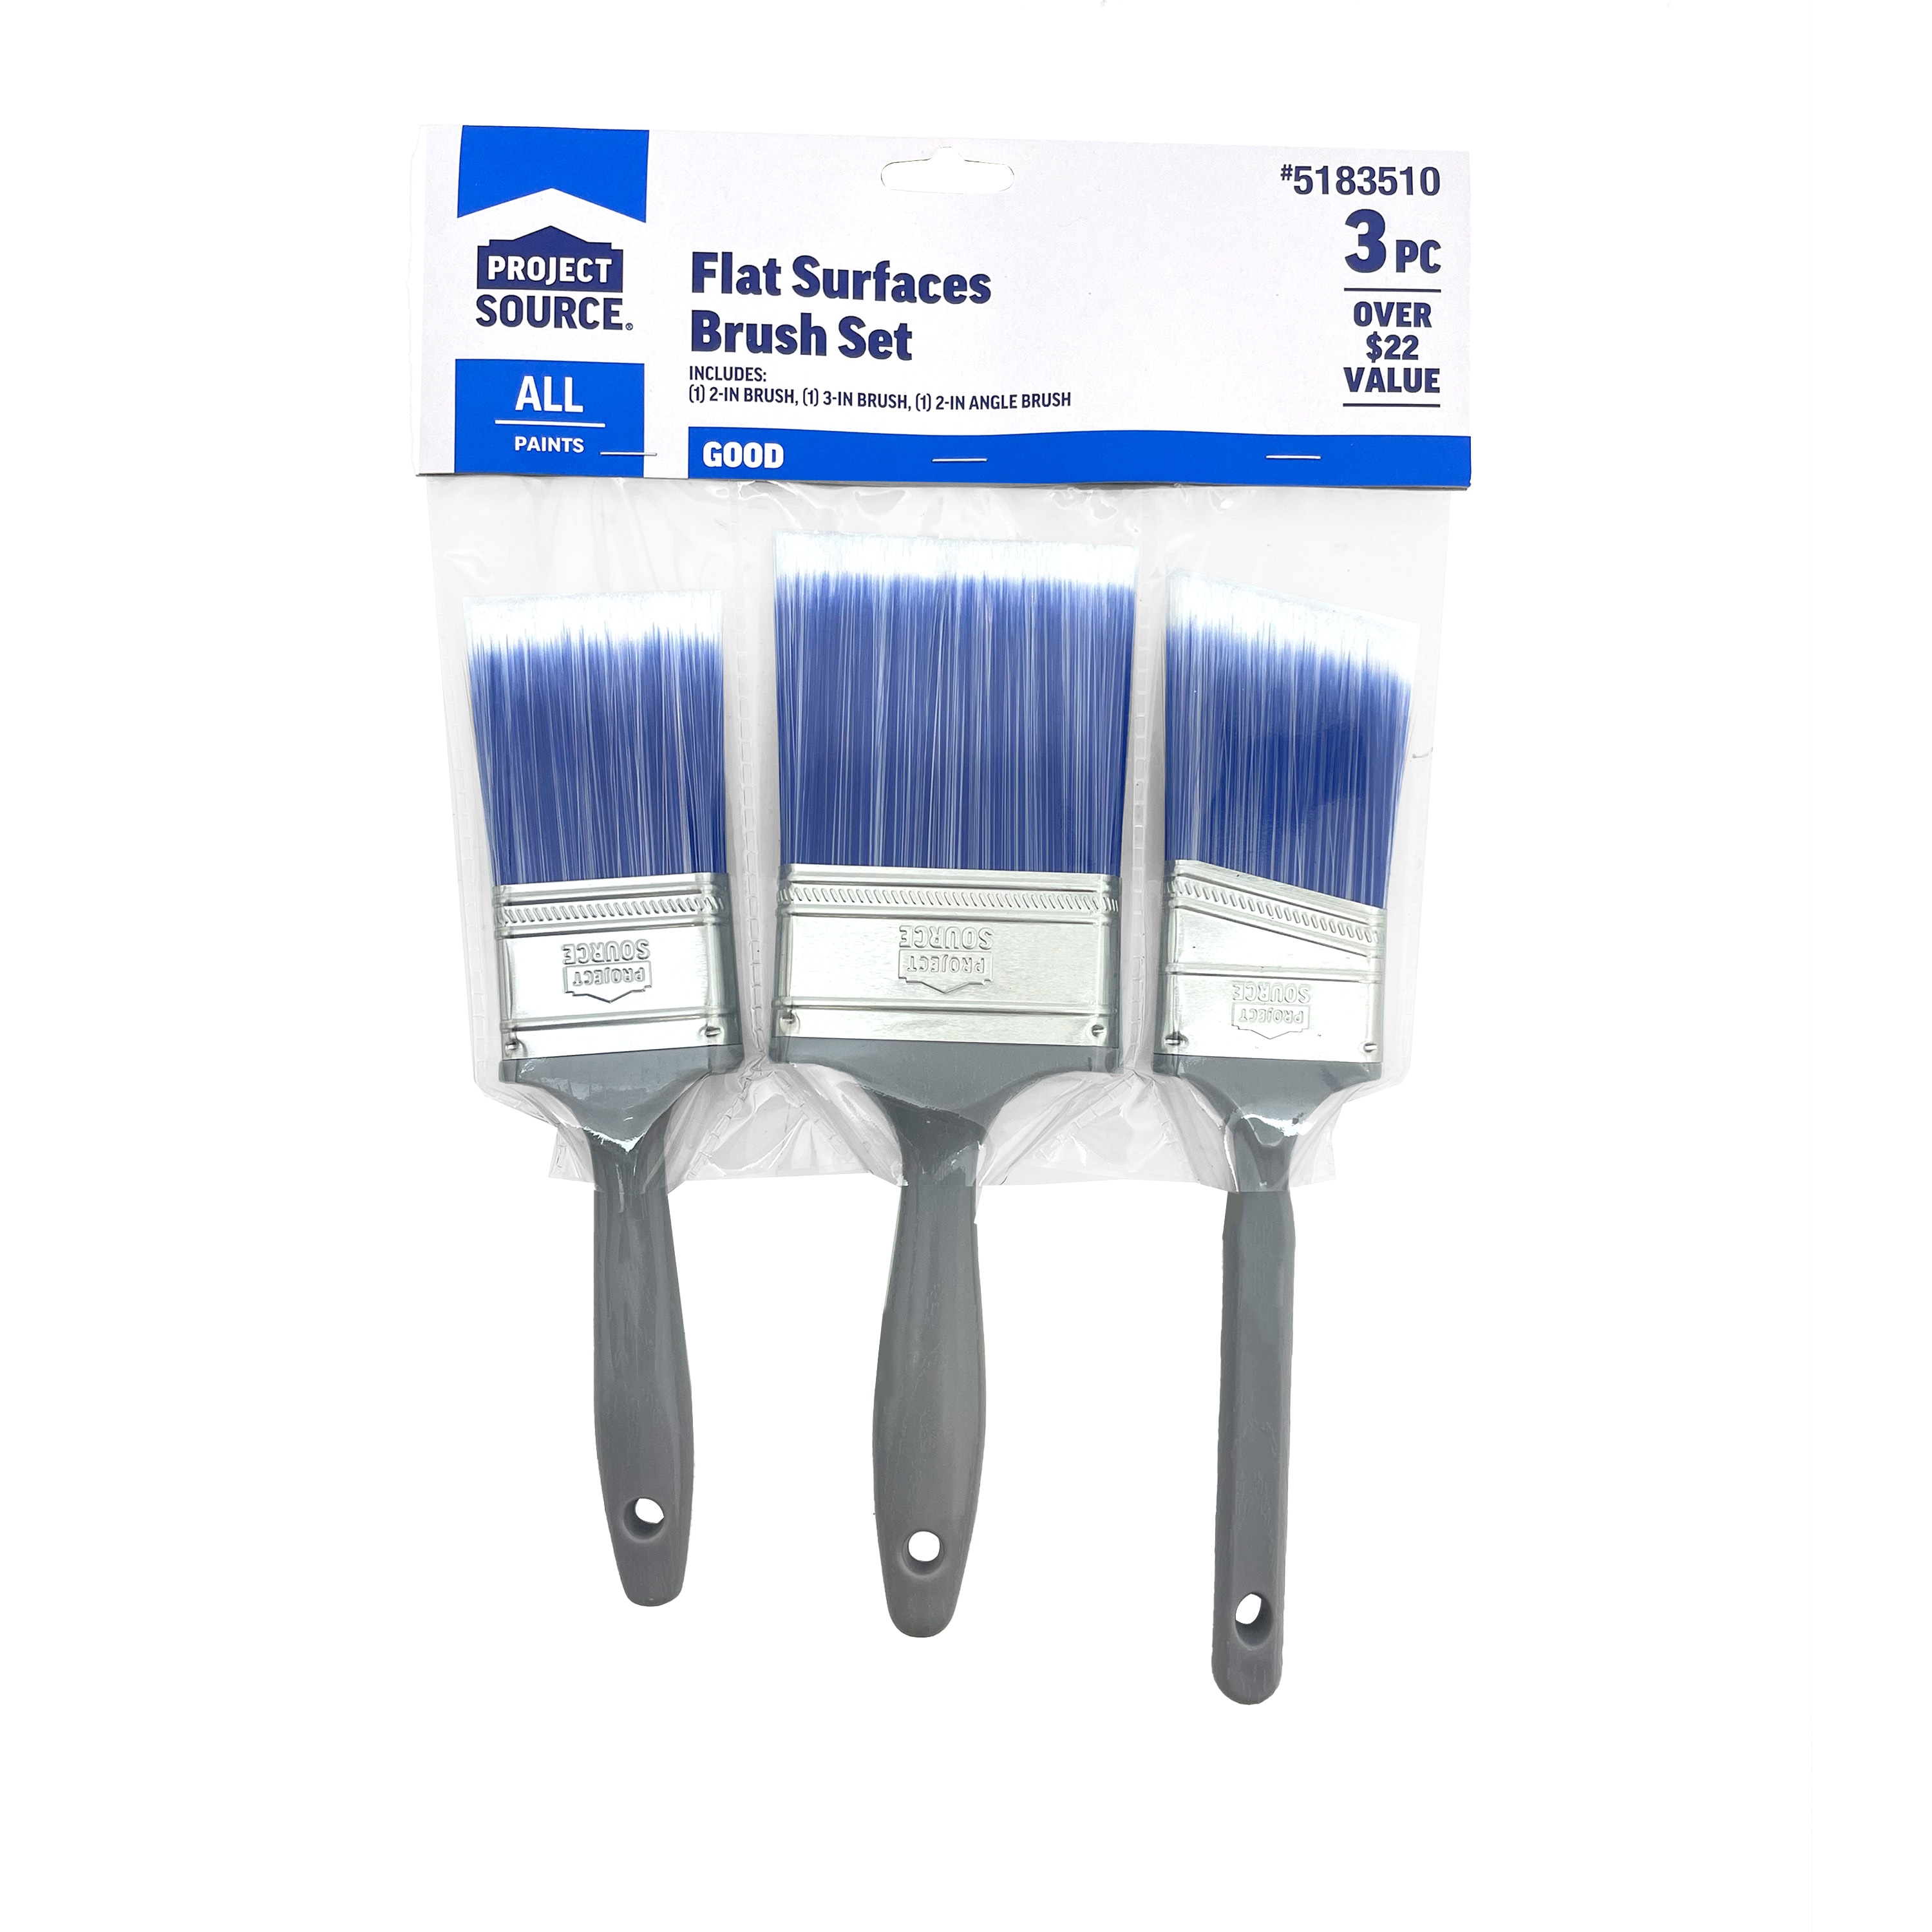 The Best Flat Brushes for Acrylic Painting Size 2 inch / 50mm